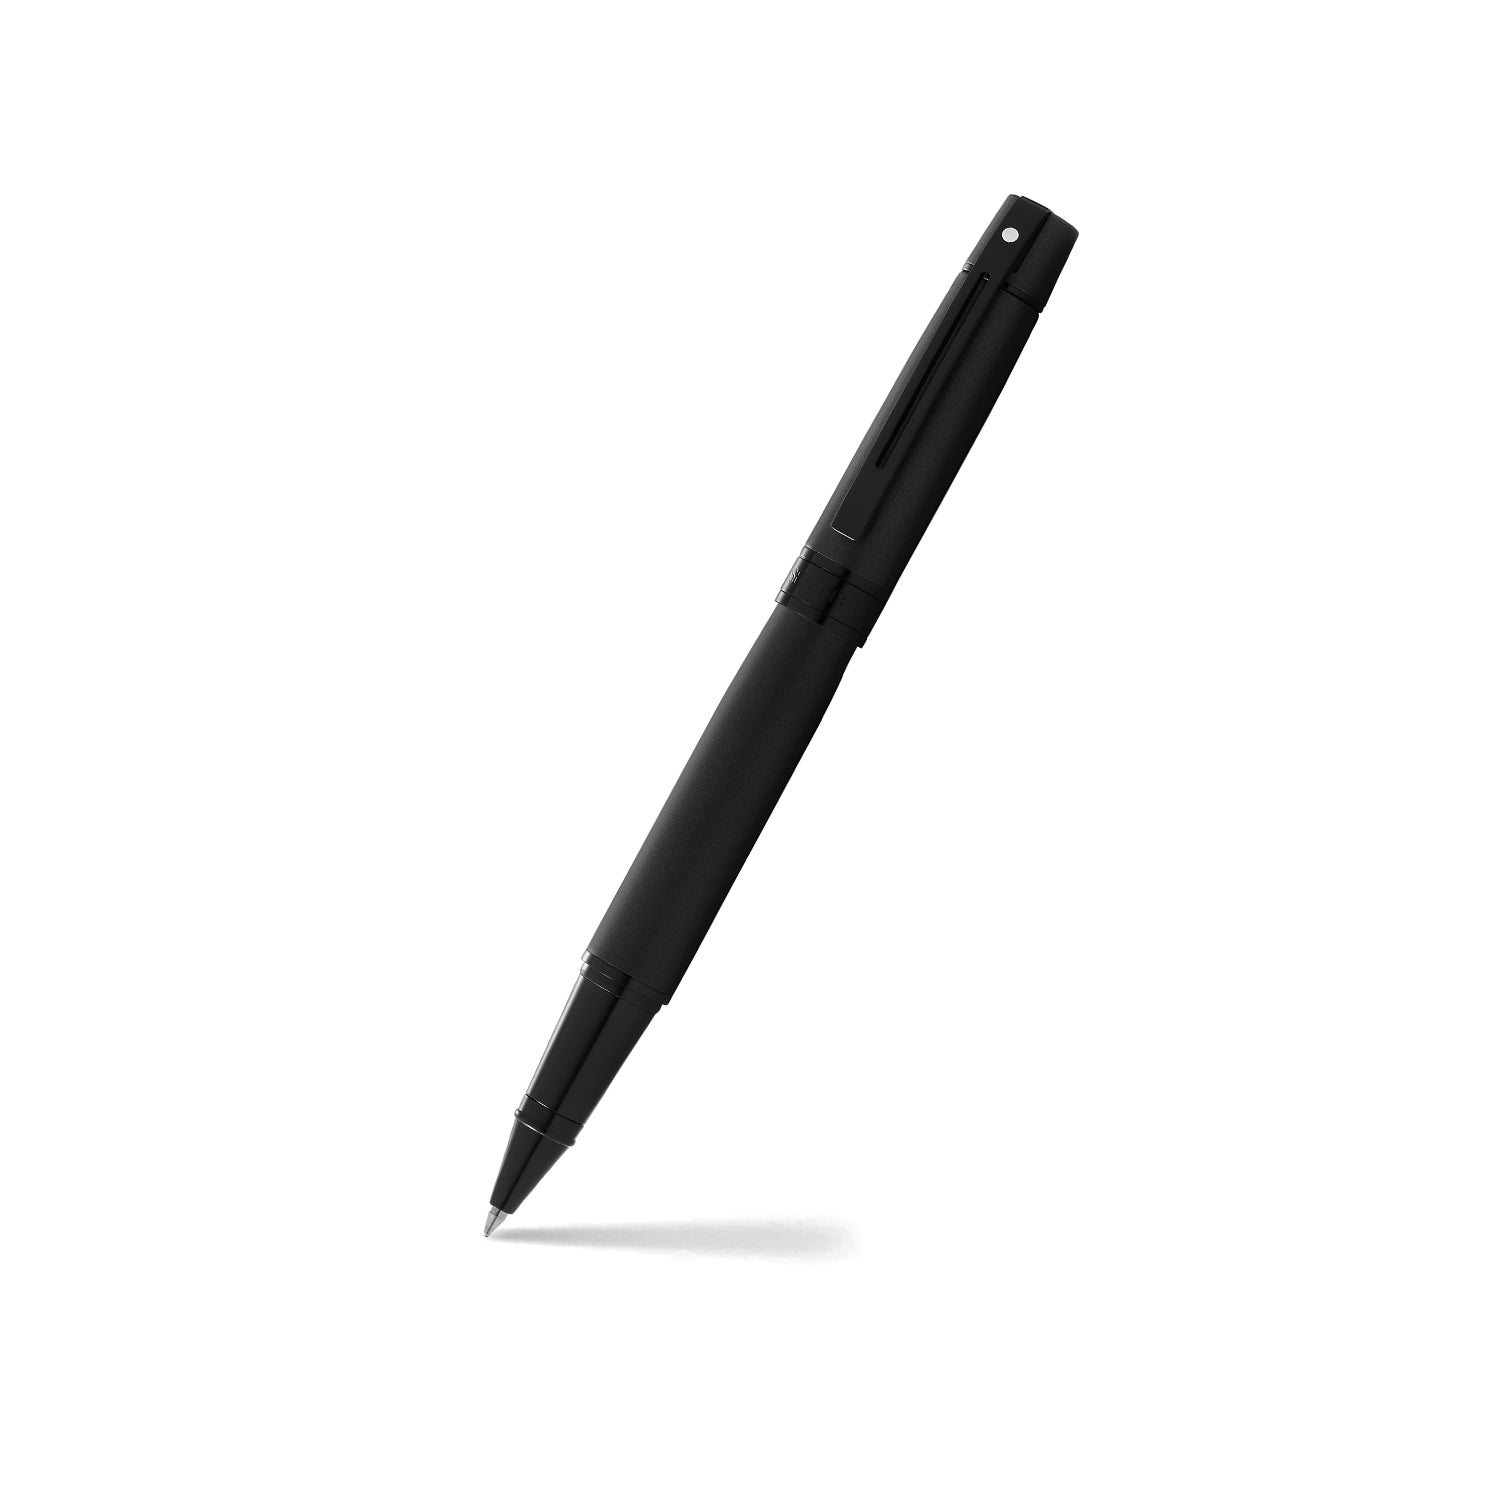 A Sheaffer® 300 Matte Black with Polished Black Trims Rollerball Pen, specifically the Sheaffer 300 model, sitting on top of a white surface.